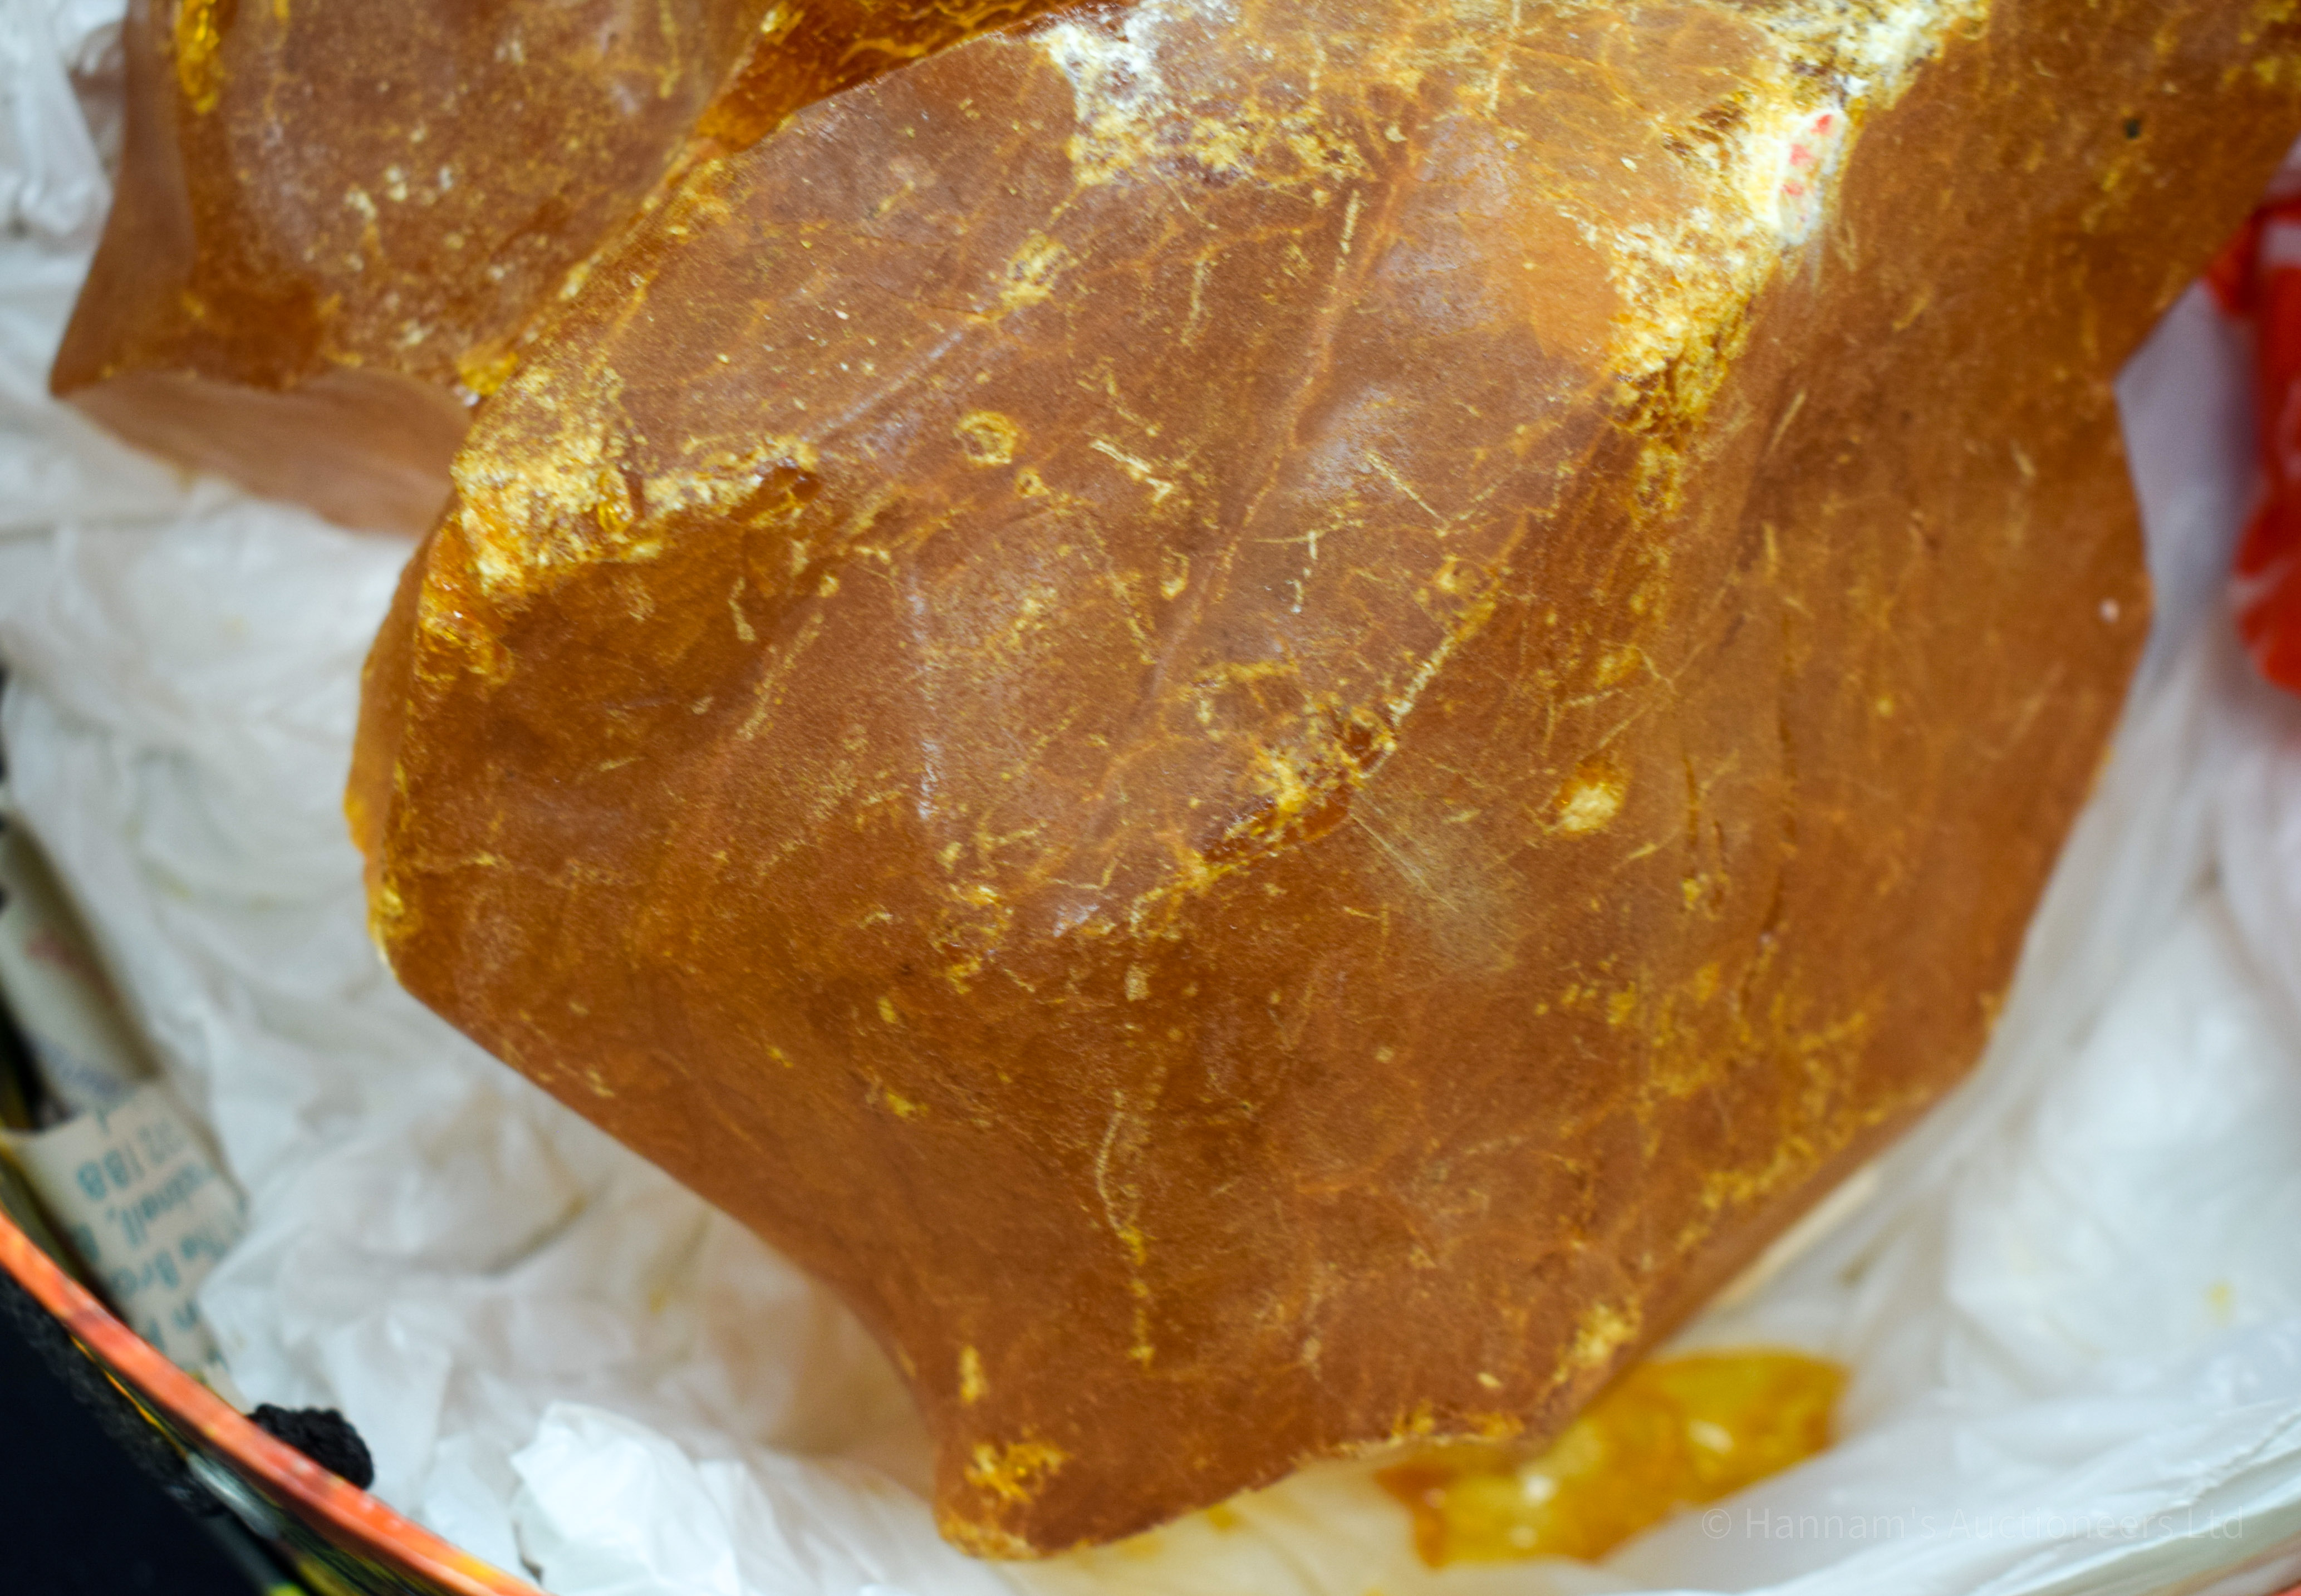 A VERY LARGE AMBER SPECIMEN 2.6 kgs. 20 cm x 16 cm. - Image 8 of 9